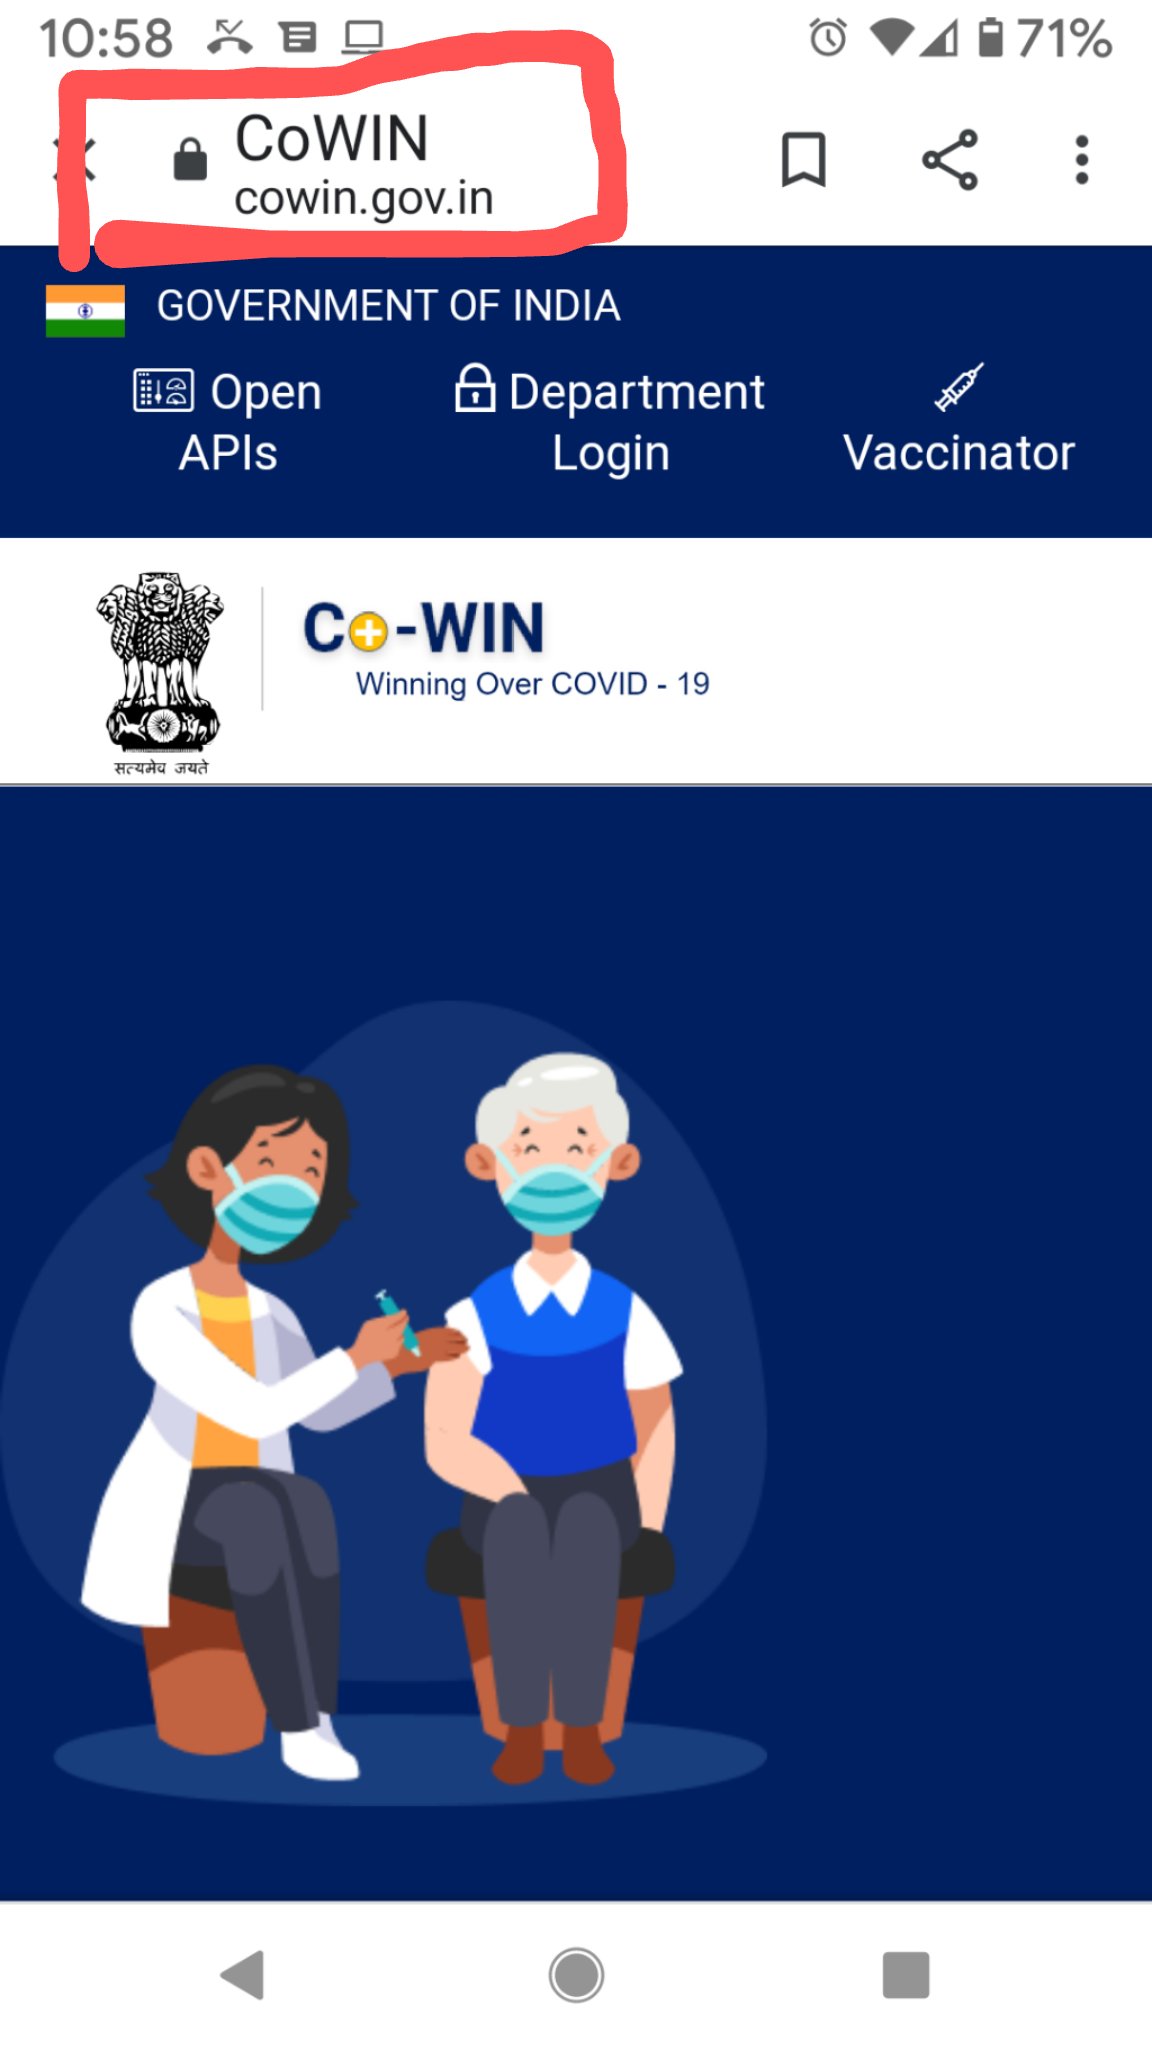 Ministry of Health on Twitter: "#LargestVaccineDrive Registration and  booking for appointment for #COVID19 Vaccination is to be done through  #CoWIN Portal: https://t.co/4VNaXj35GR. There is NO #CoWIN App for  beneficiary registration. The App